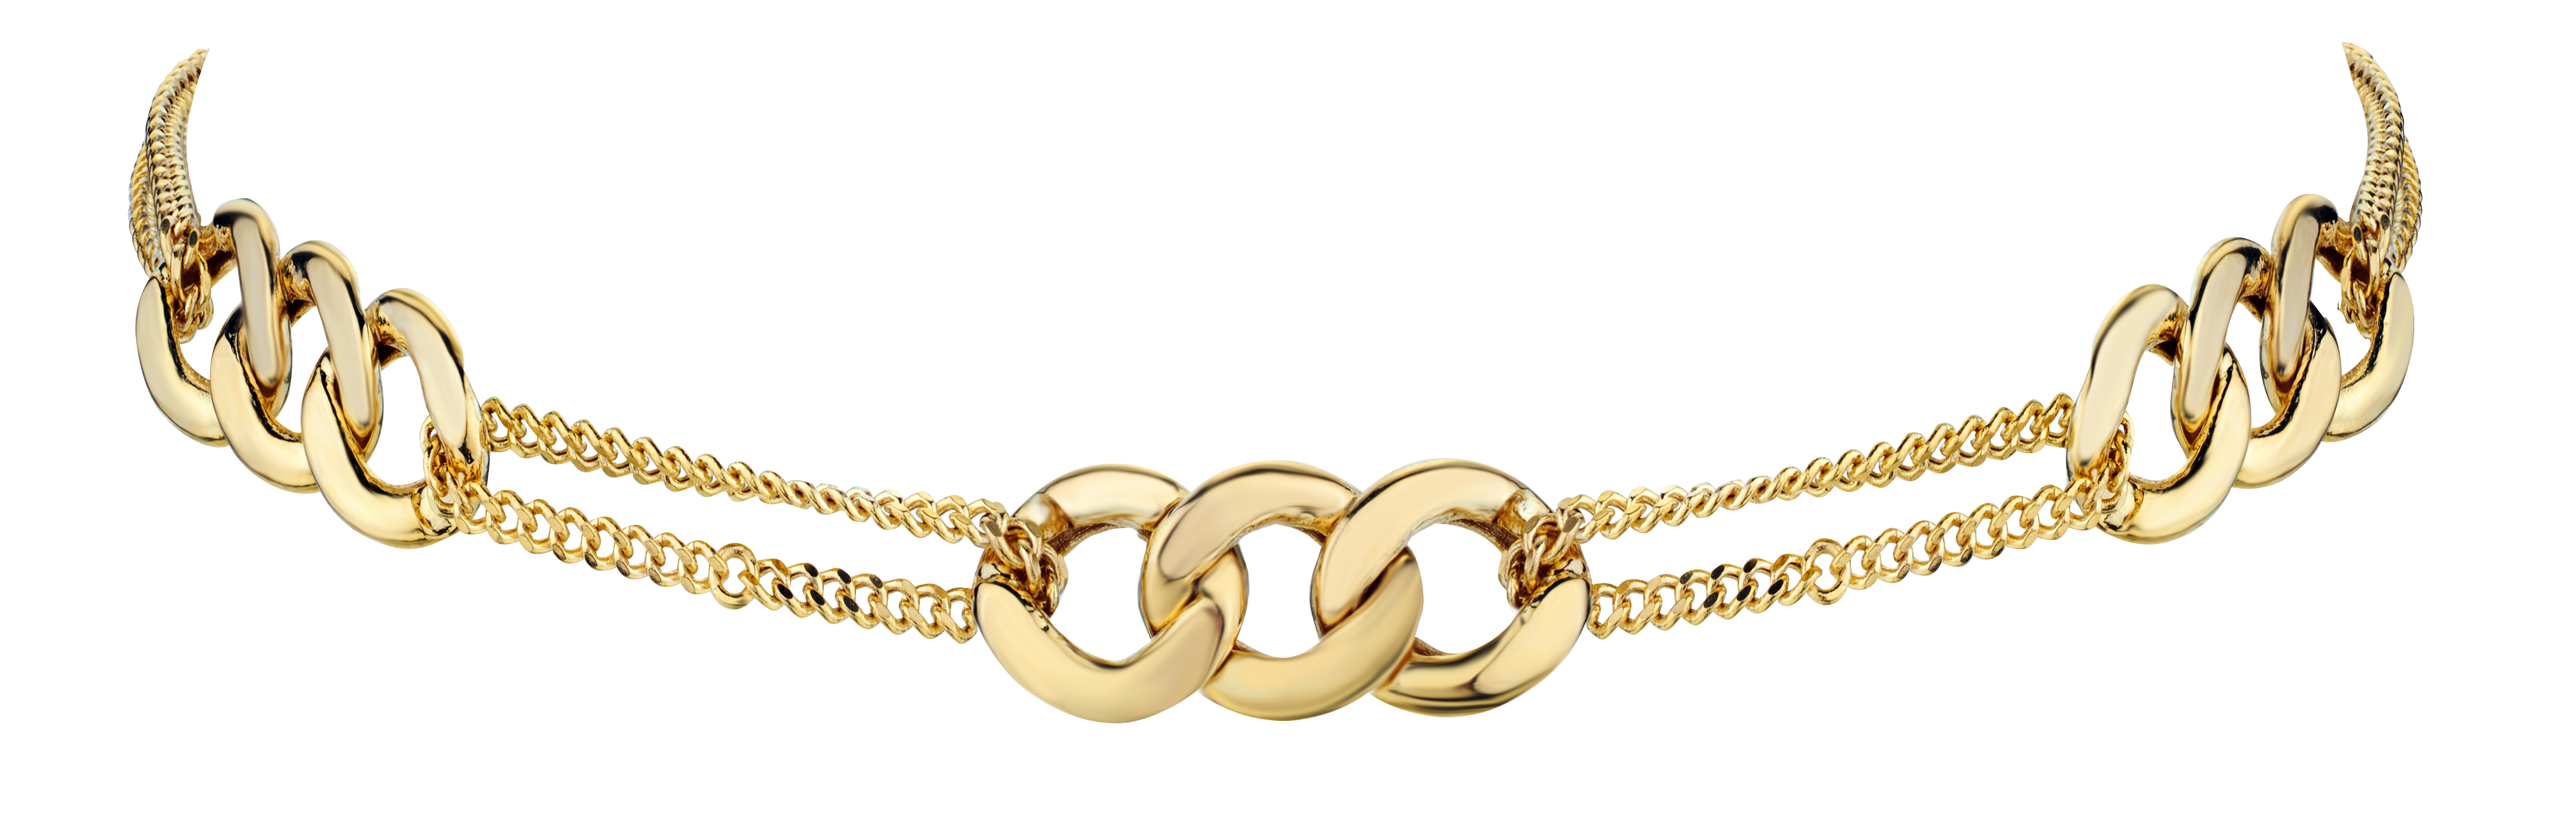 10kt Yellow Gold Two Link Station Bracelet.....................NOW